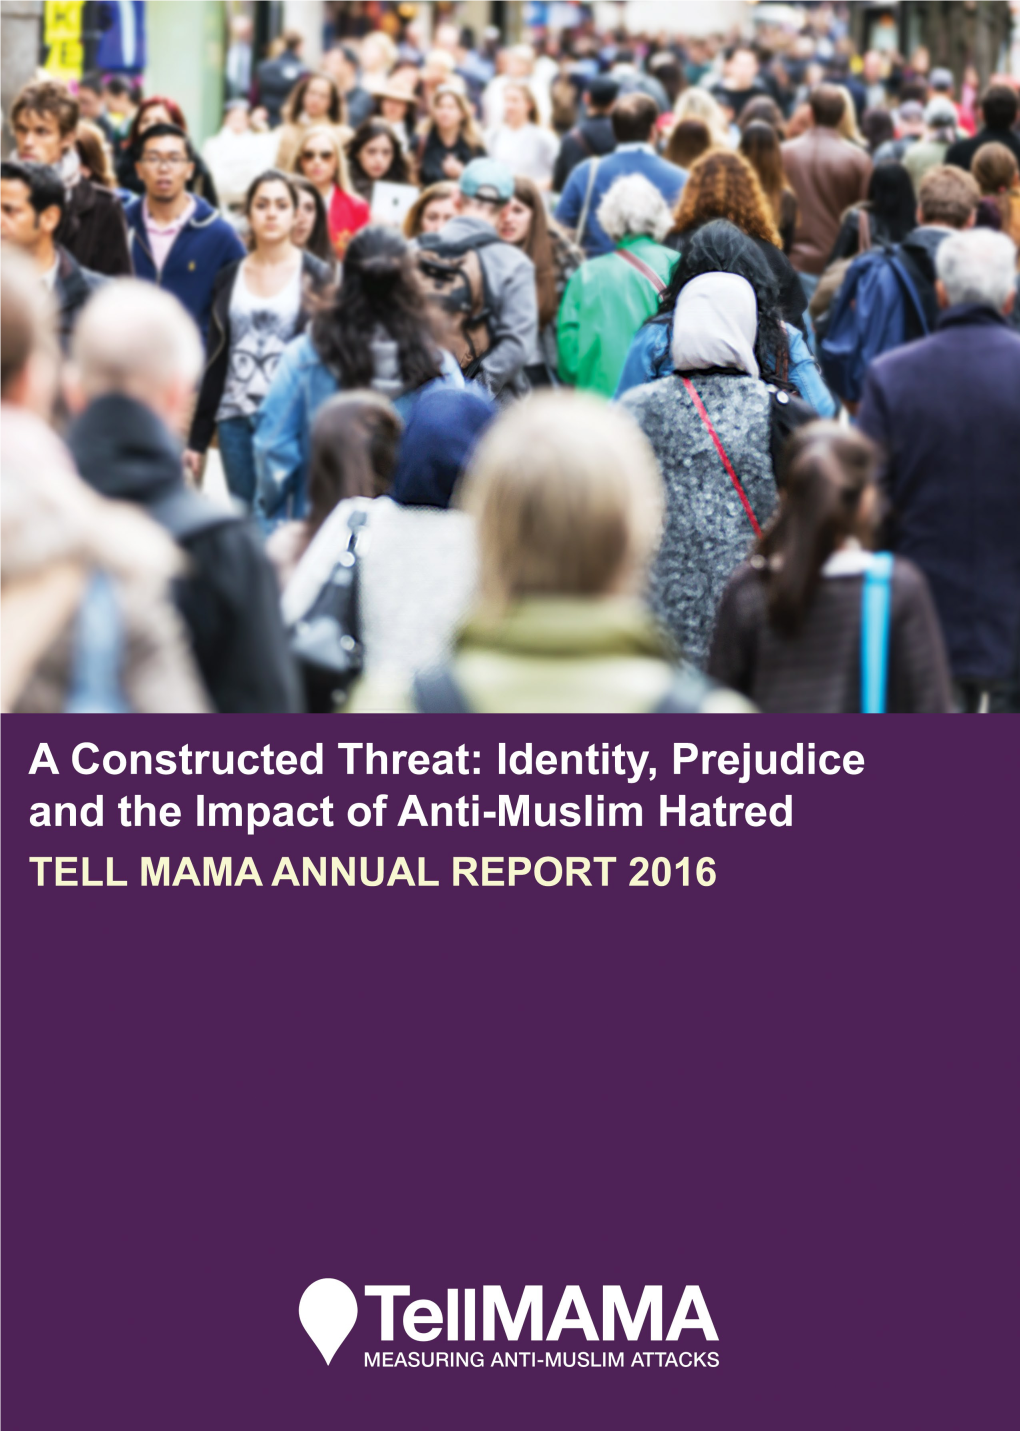 A Constructed Threat: Identity, Intolerance and the Impact of Anti-Muslim Hatred